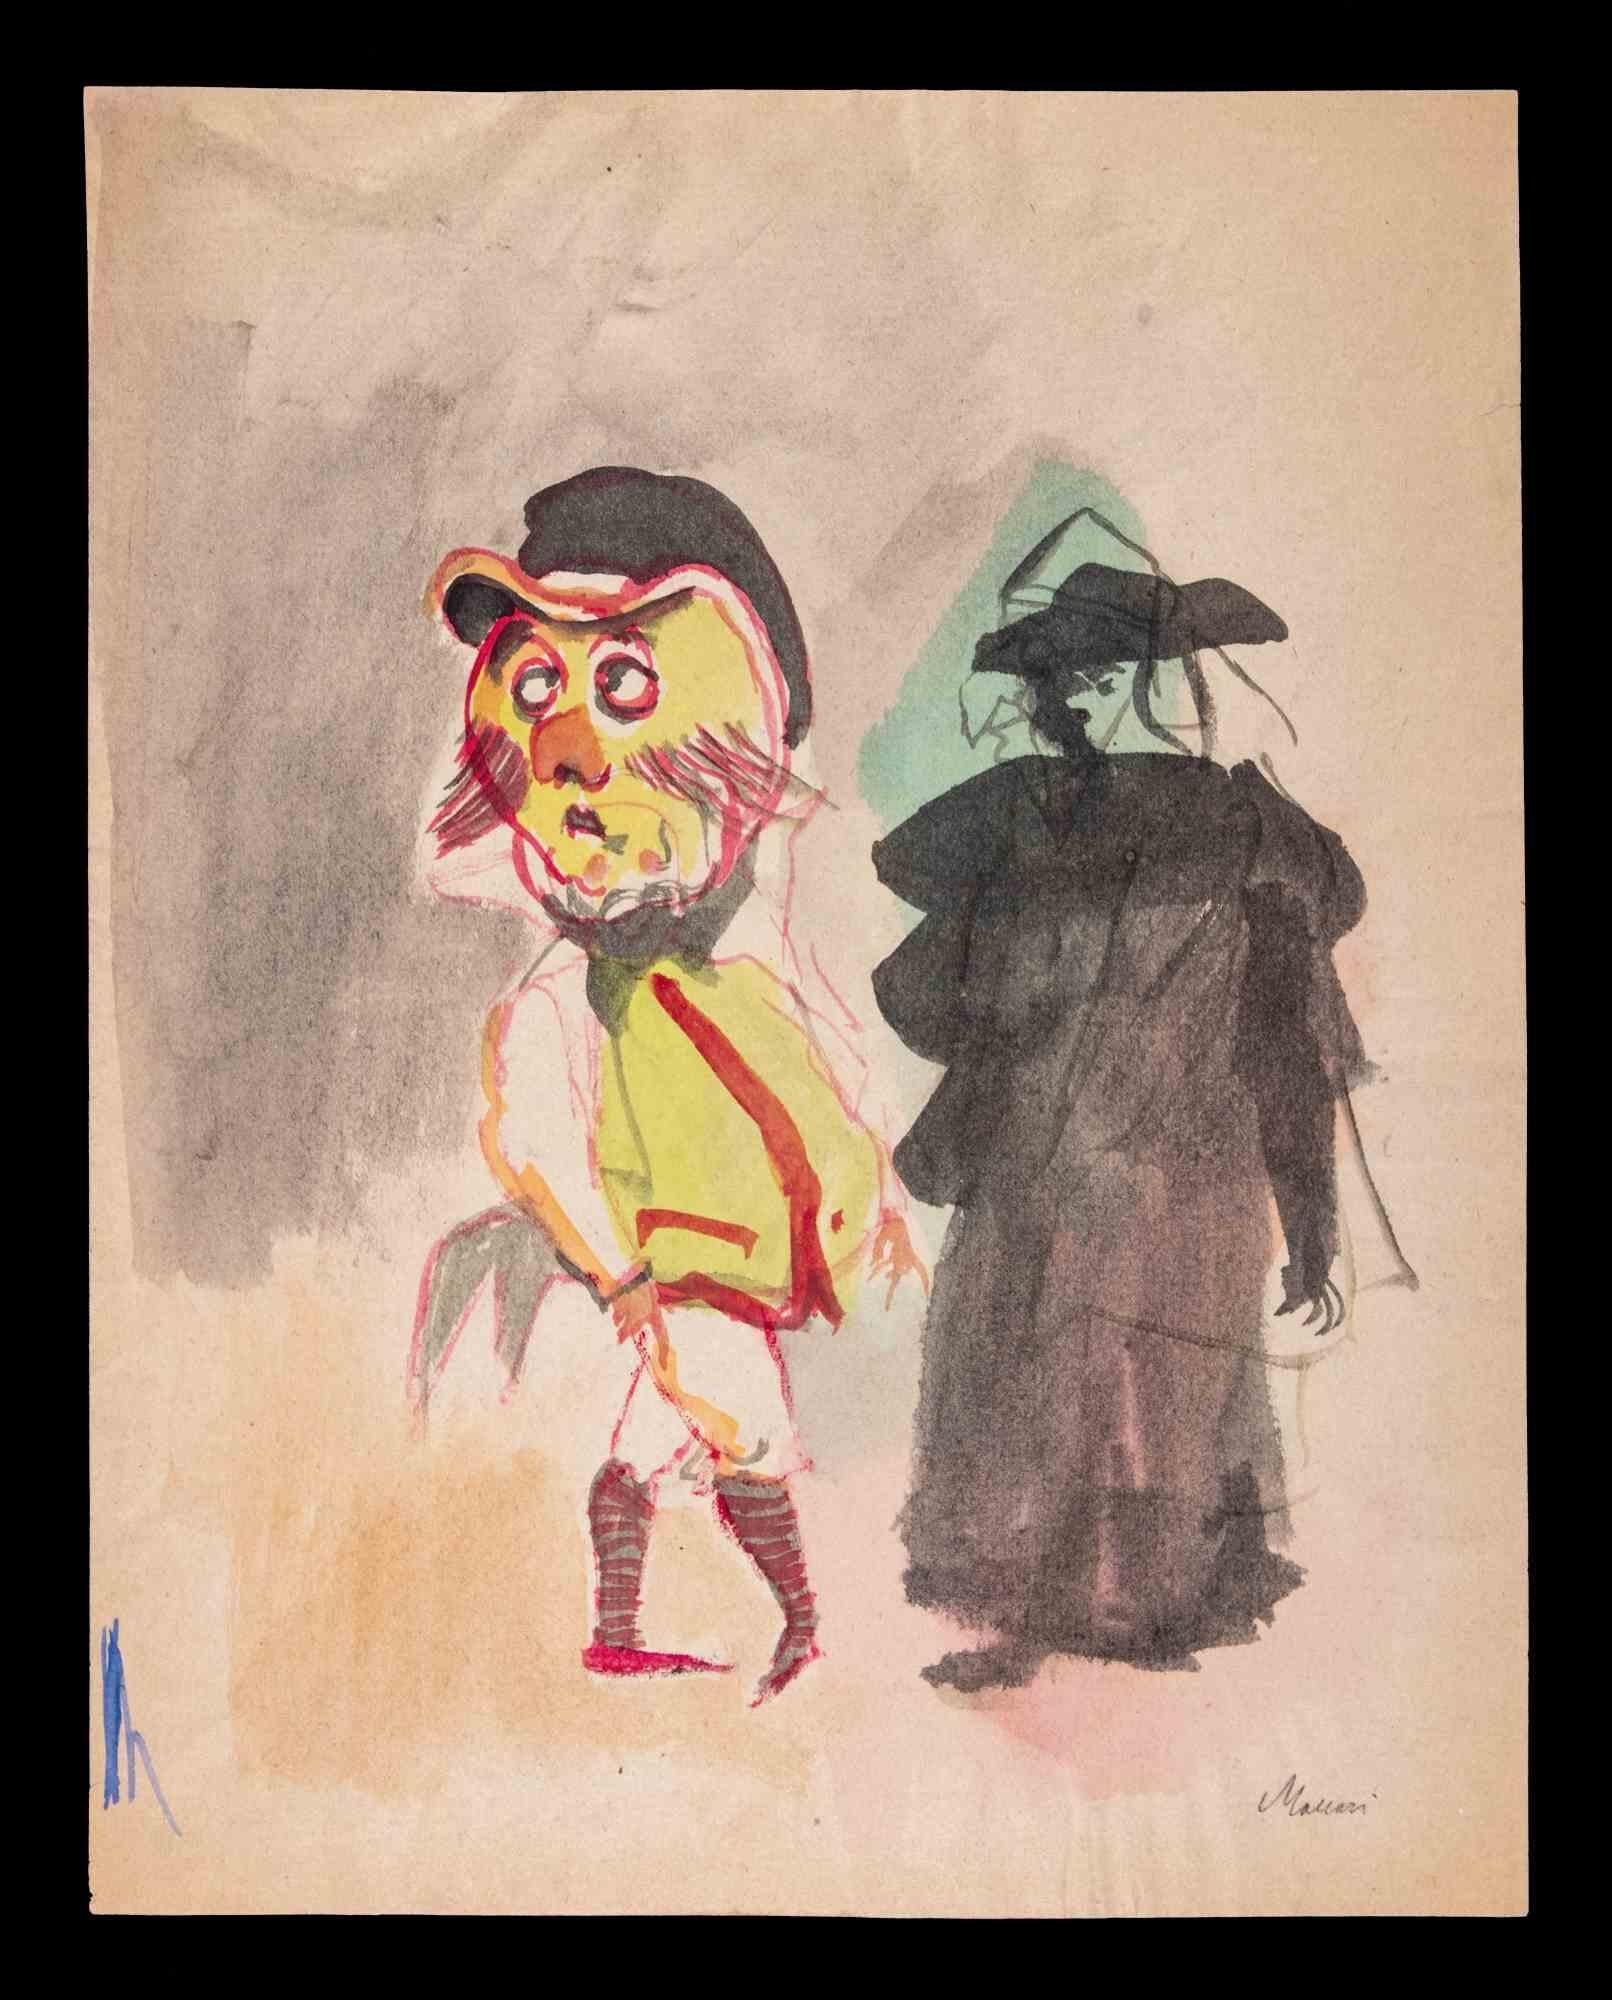 Maggio Fiorentino is a Watercolor Drawing realized by Mino Maccari  (1924-1989) in 1940s.

Hand-signed on the lower margin.

Good condition on a yellowed paper.

Mino Maccari (Siena, 1924-Rome, June 16, 1989) was an Italian writer, painter, engraver